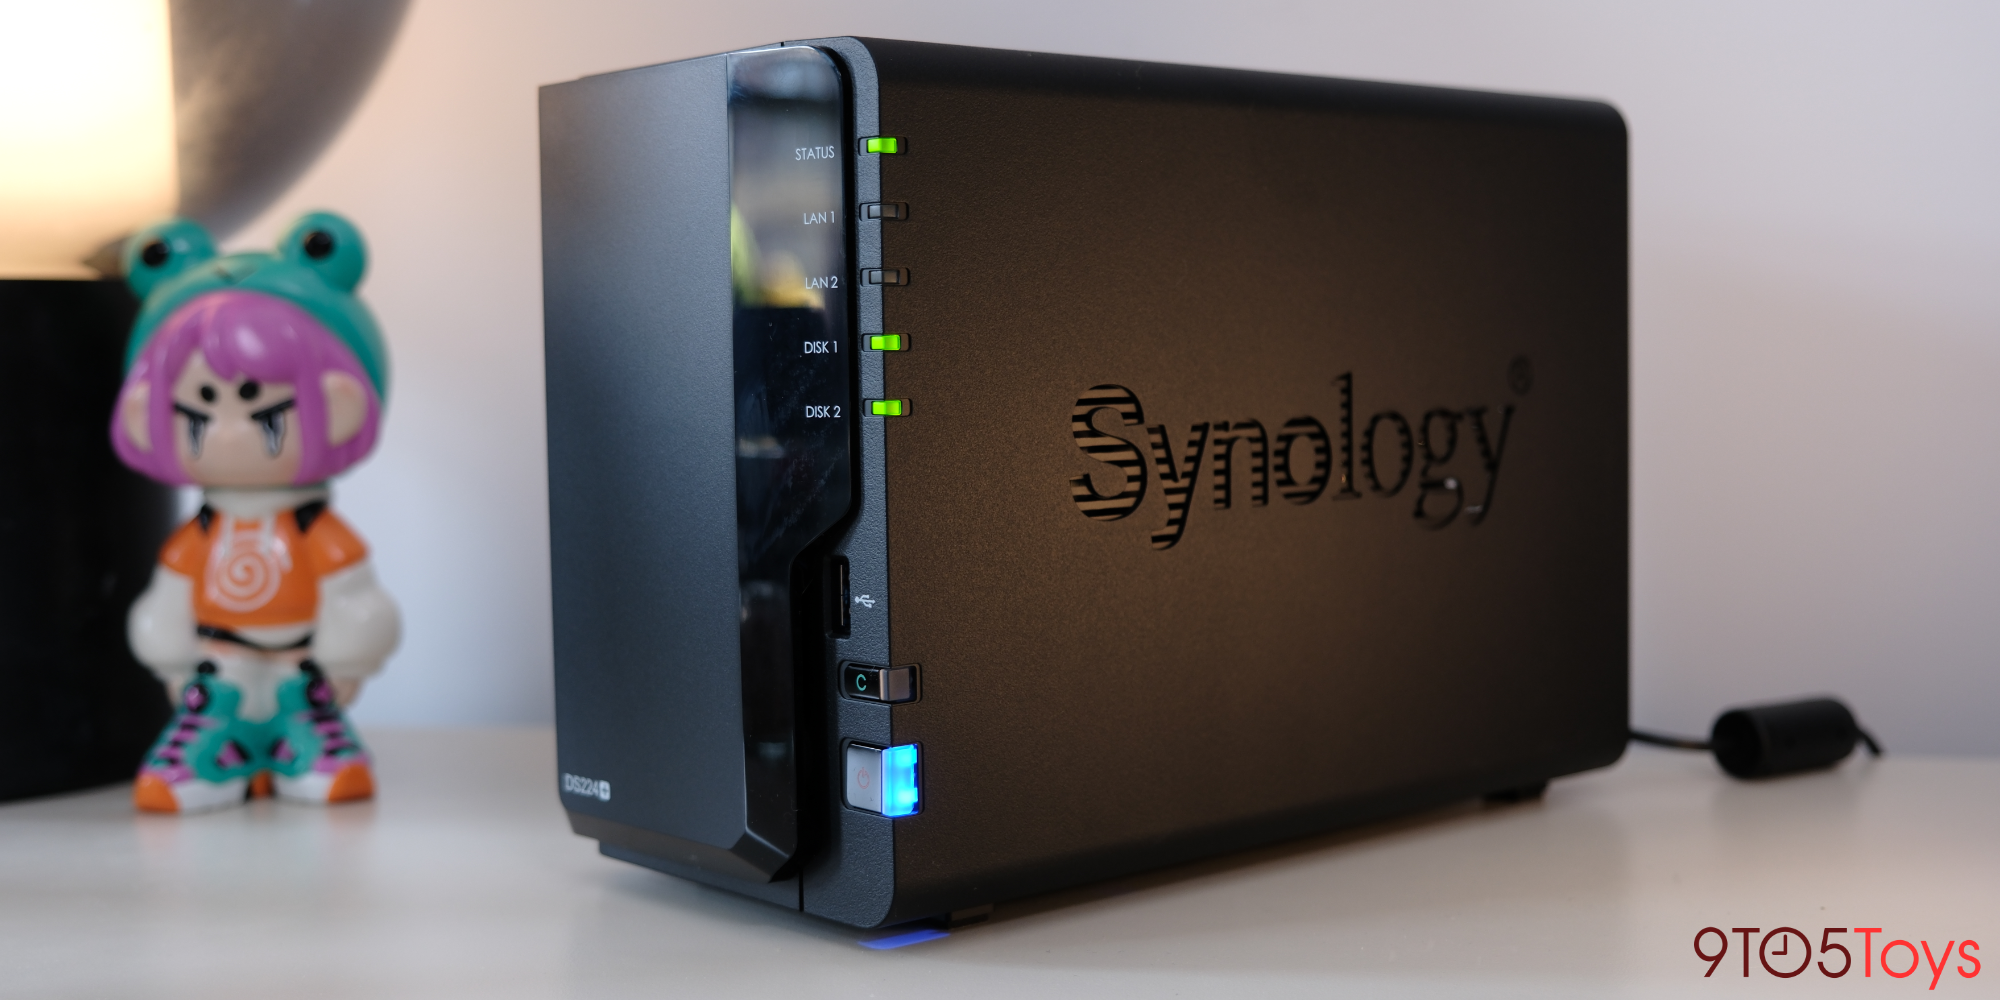 Synology on LinkedIn: Synology is excited to officially unveil its